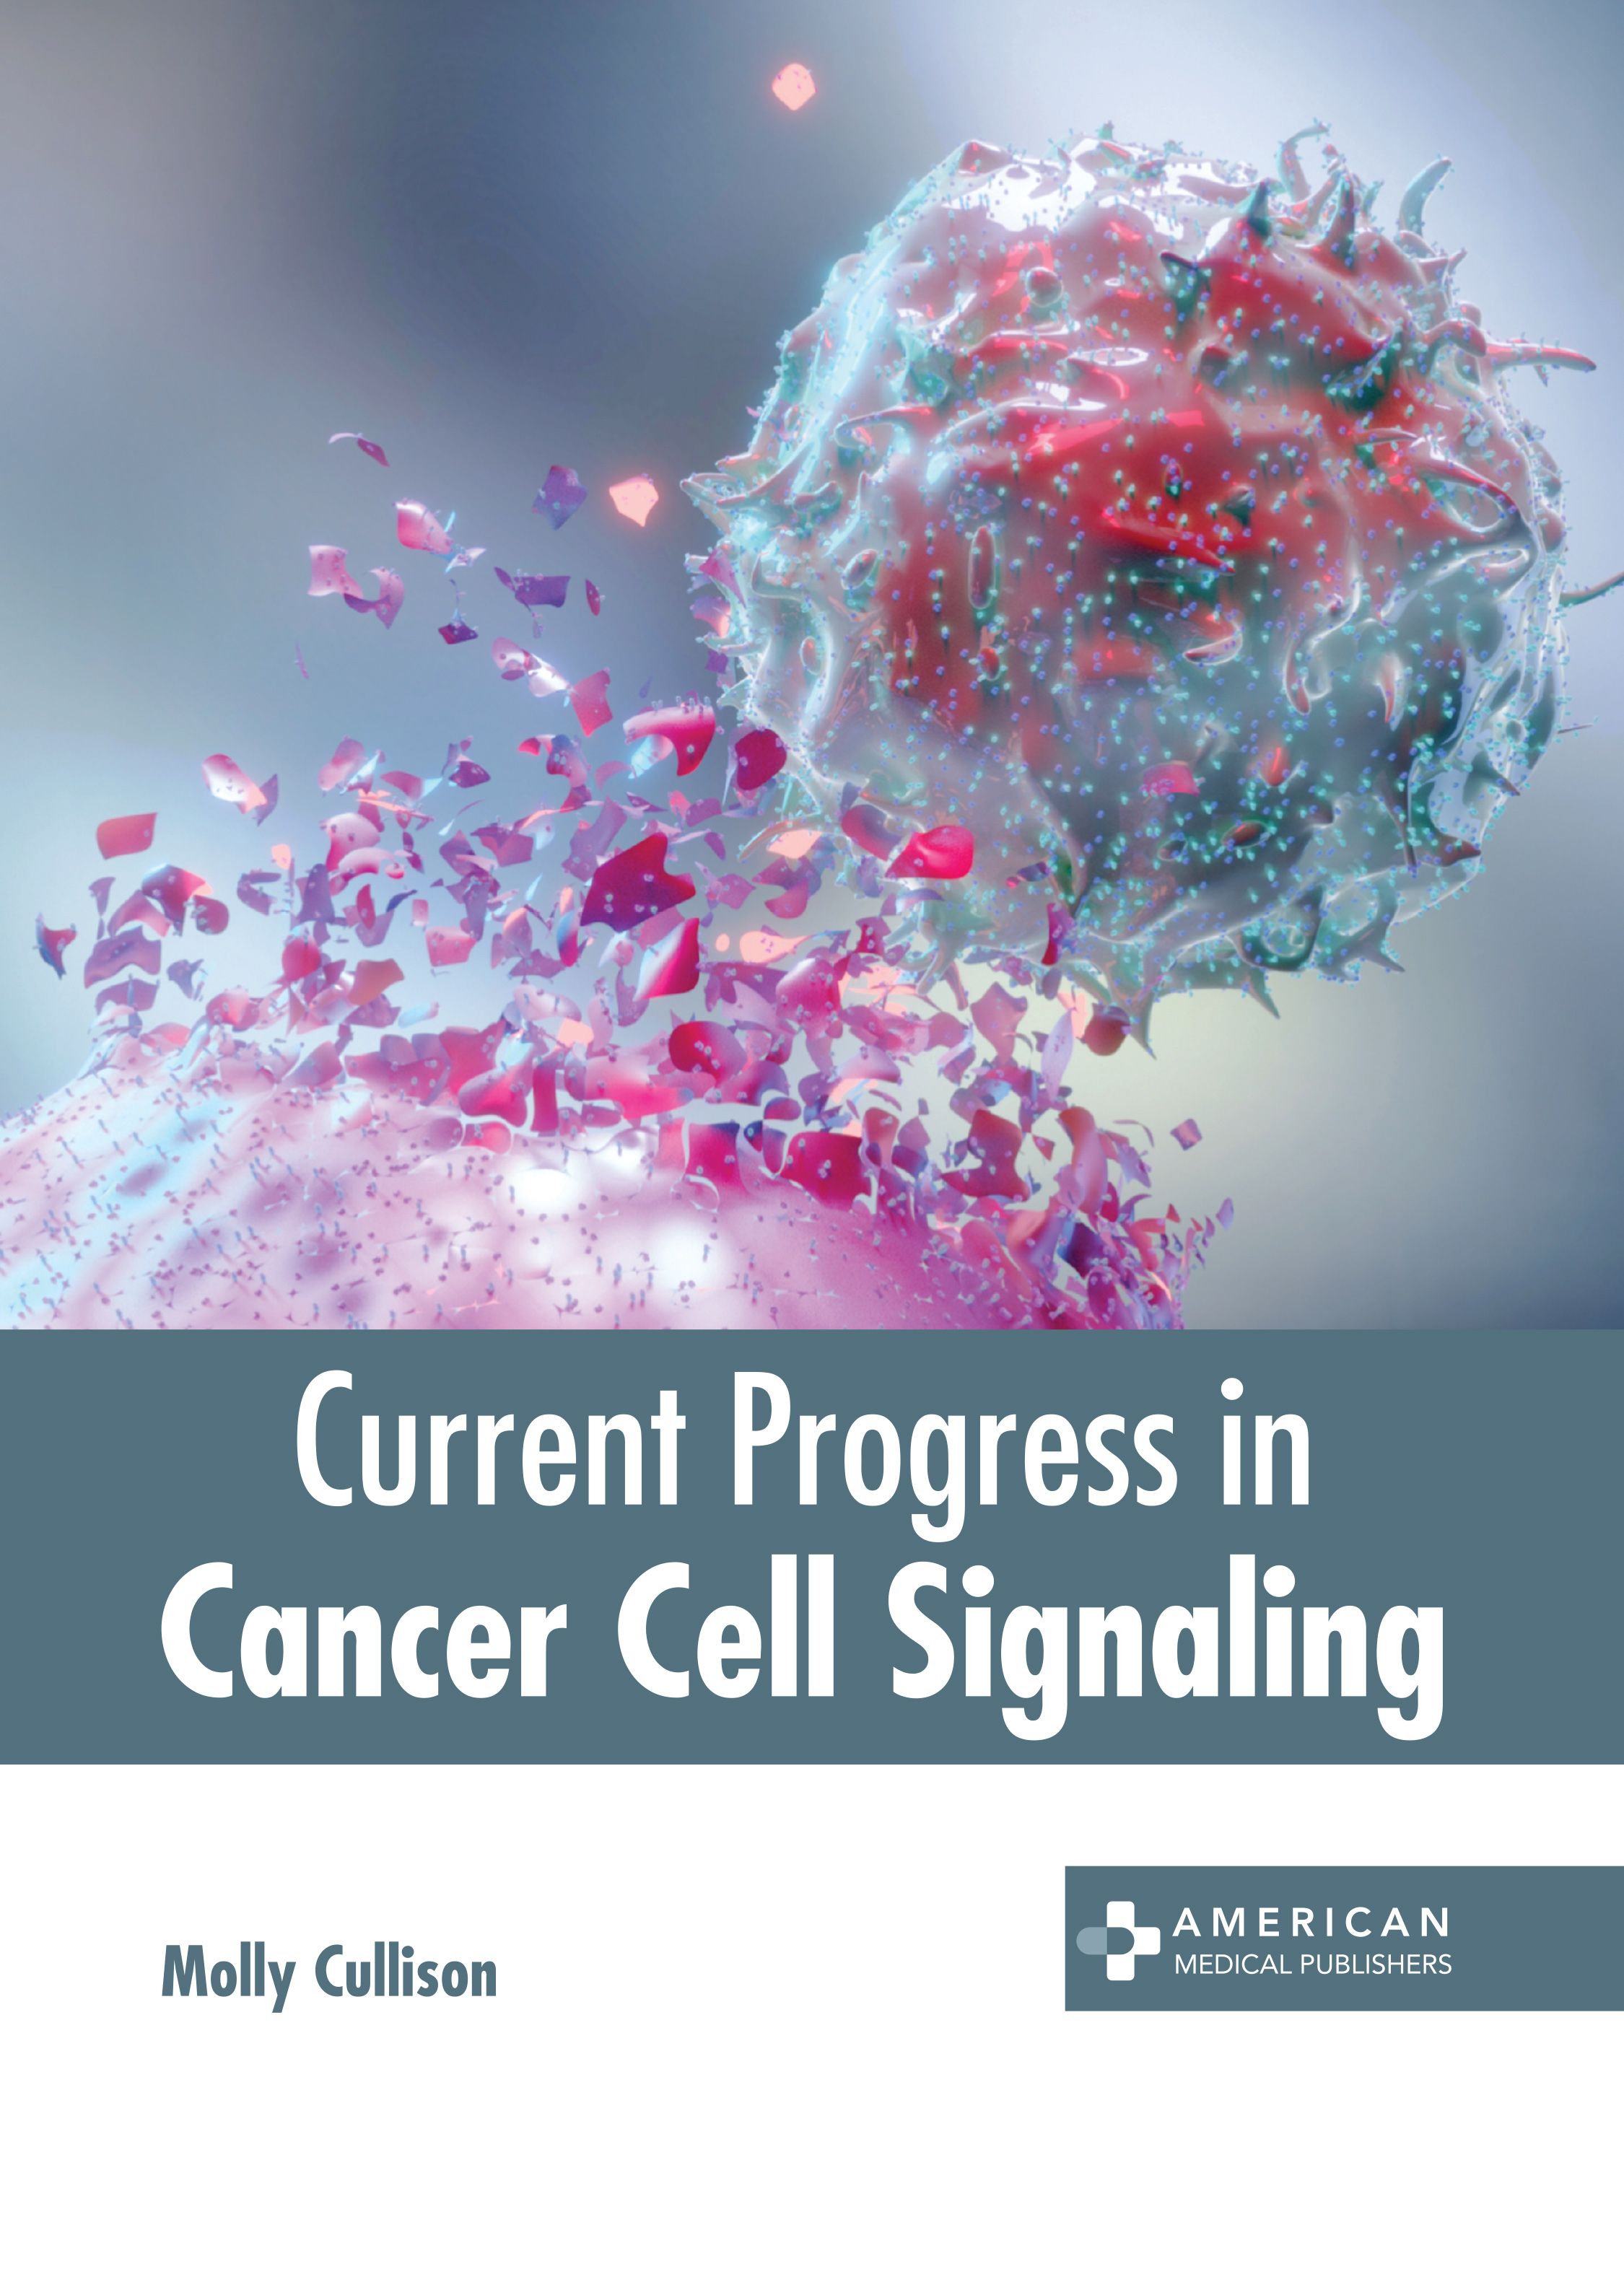 

exclusive-publishers/american-medical-publishers/current-progress-in-cancer-cell-signaling-9781639276462